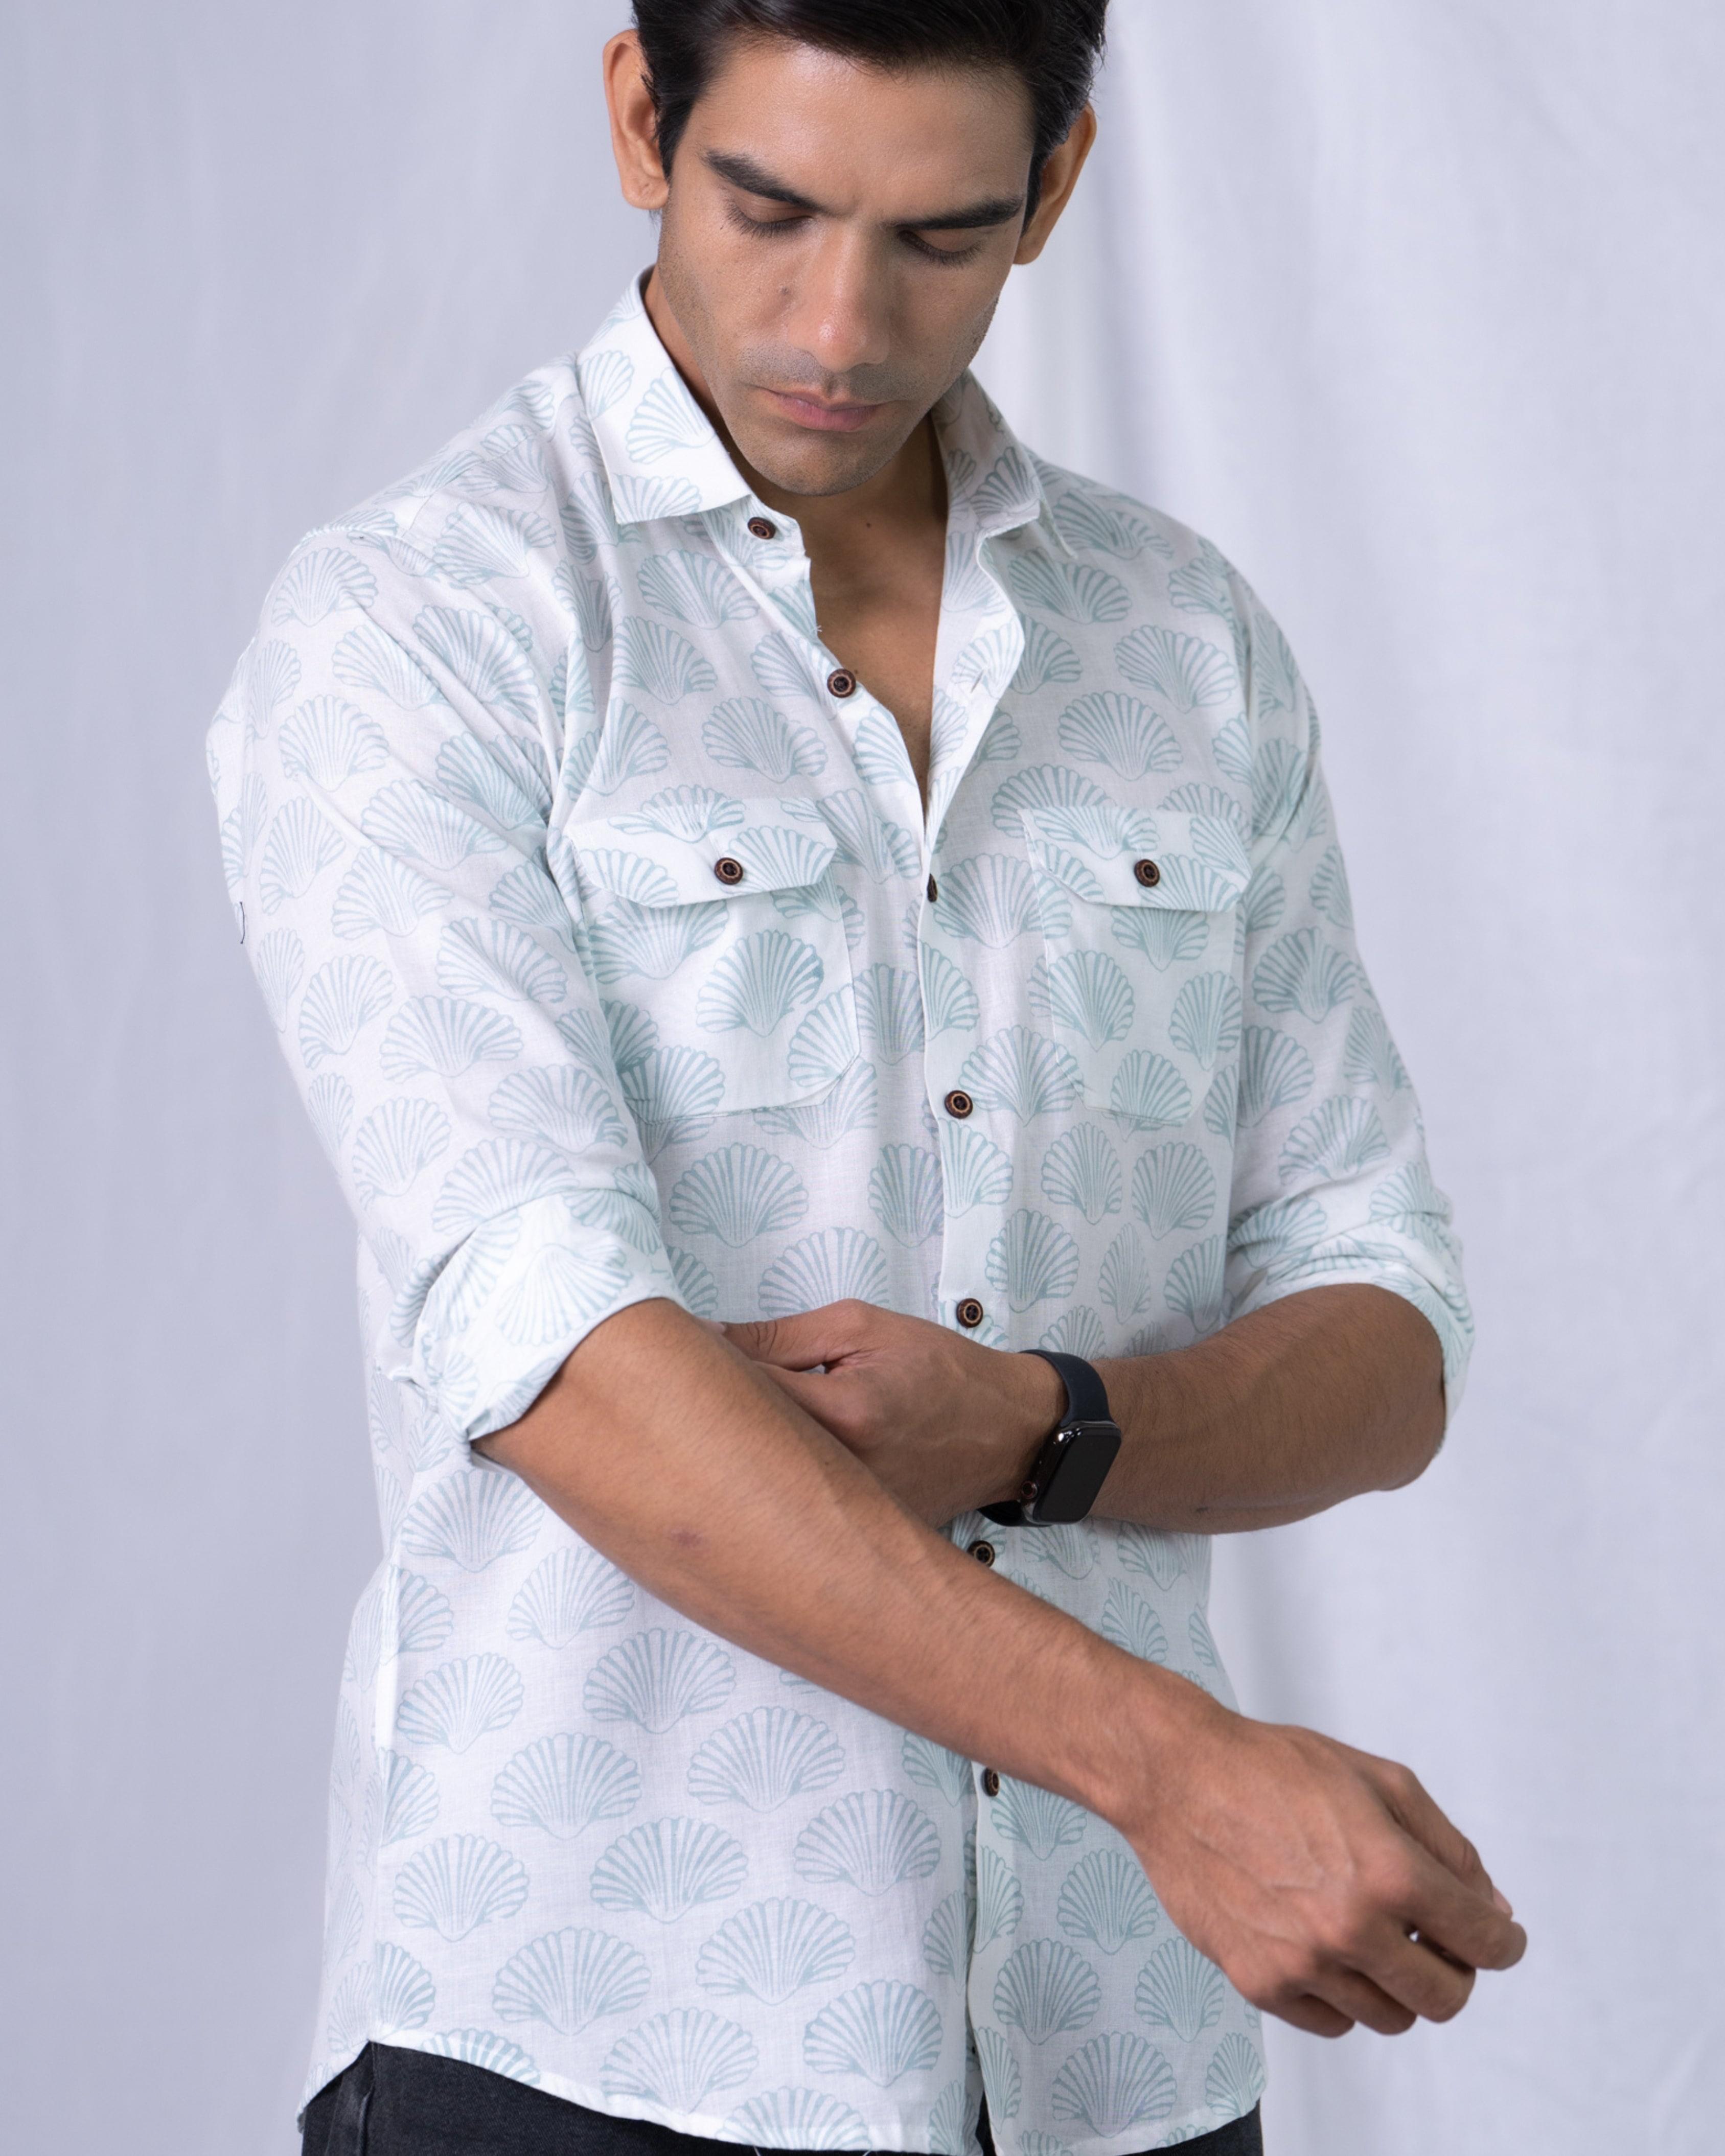 Firangi Yarn 100% Cotton Block Printed Sea Shell Casual Full Sleeves With Flap Pockets Men's Party Wear Shirt Blue/White